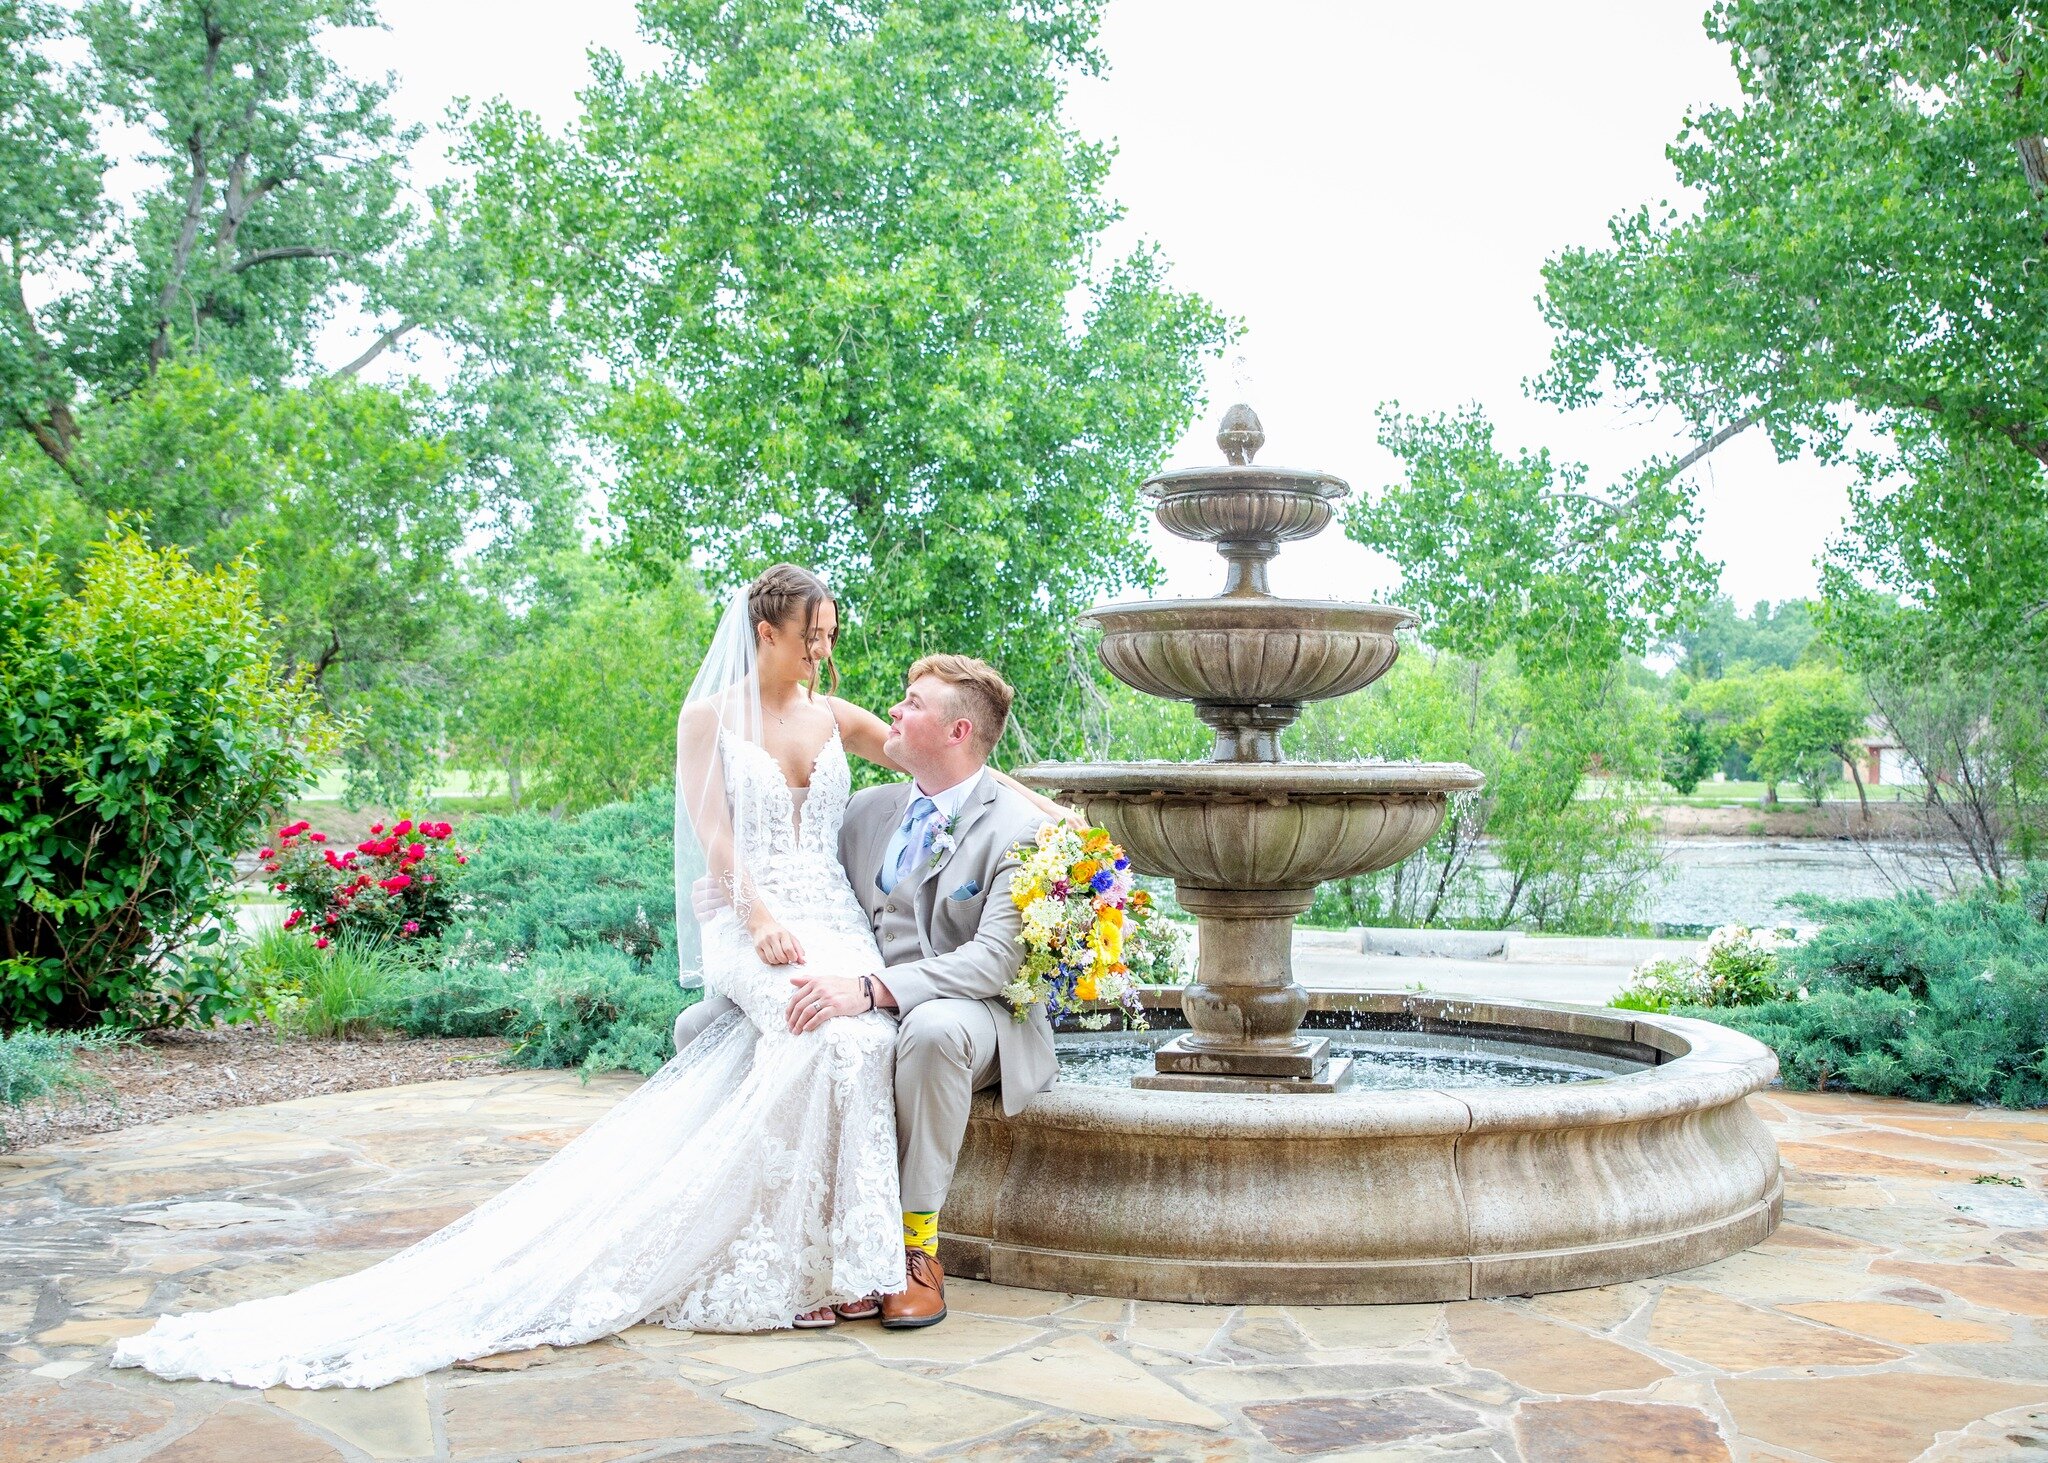 😍 WOW Wednesday 😍

How amazing is this backdrop?? Payton &amp; Peyton look stunning in front of all the green.

📸 Hawk Photography 
💐 Emily Lauren
Dress &amp; Suit: Bridal Shop 

#maywedding #wedding #green #weddingvenue #fountain #wowwednesday #